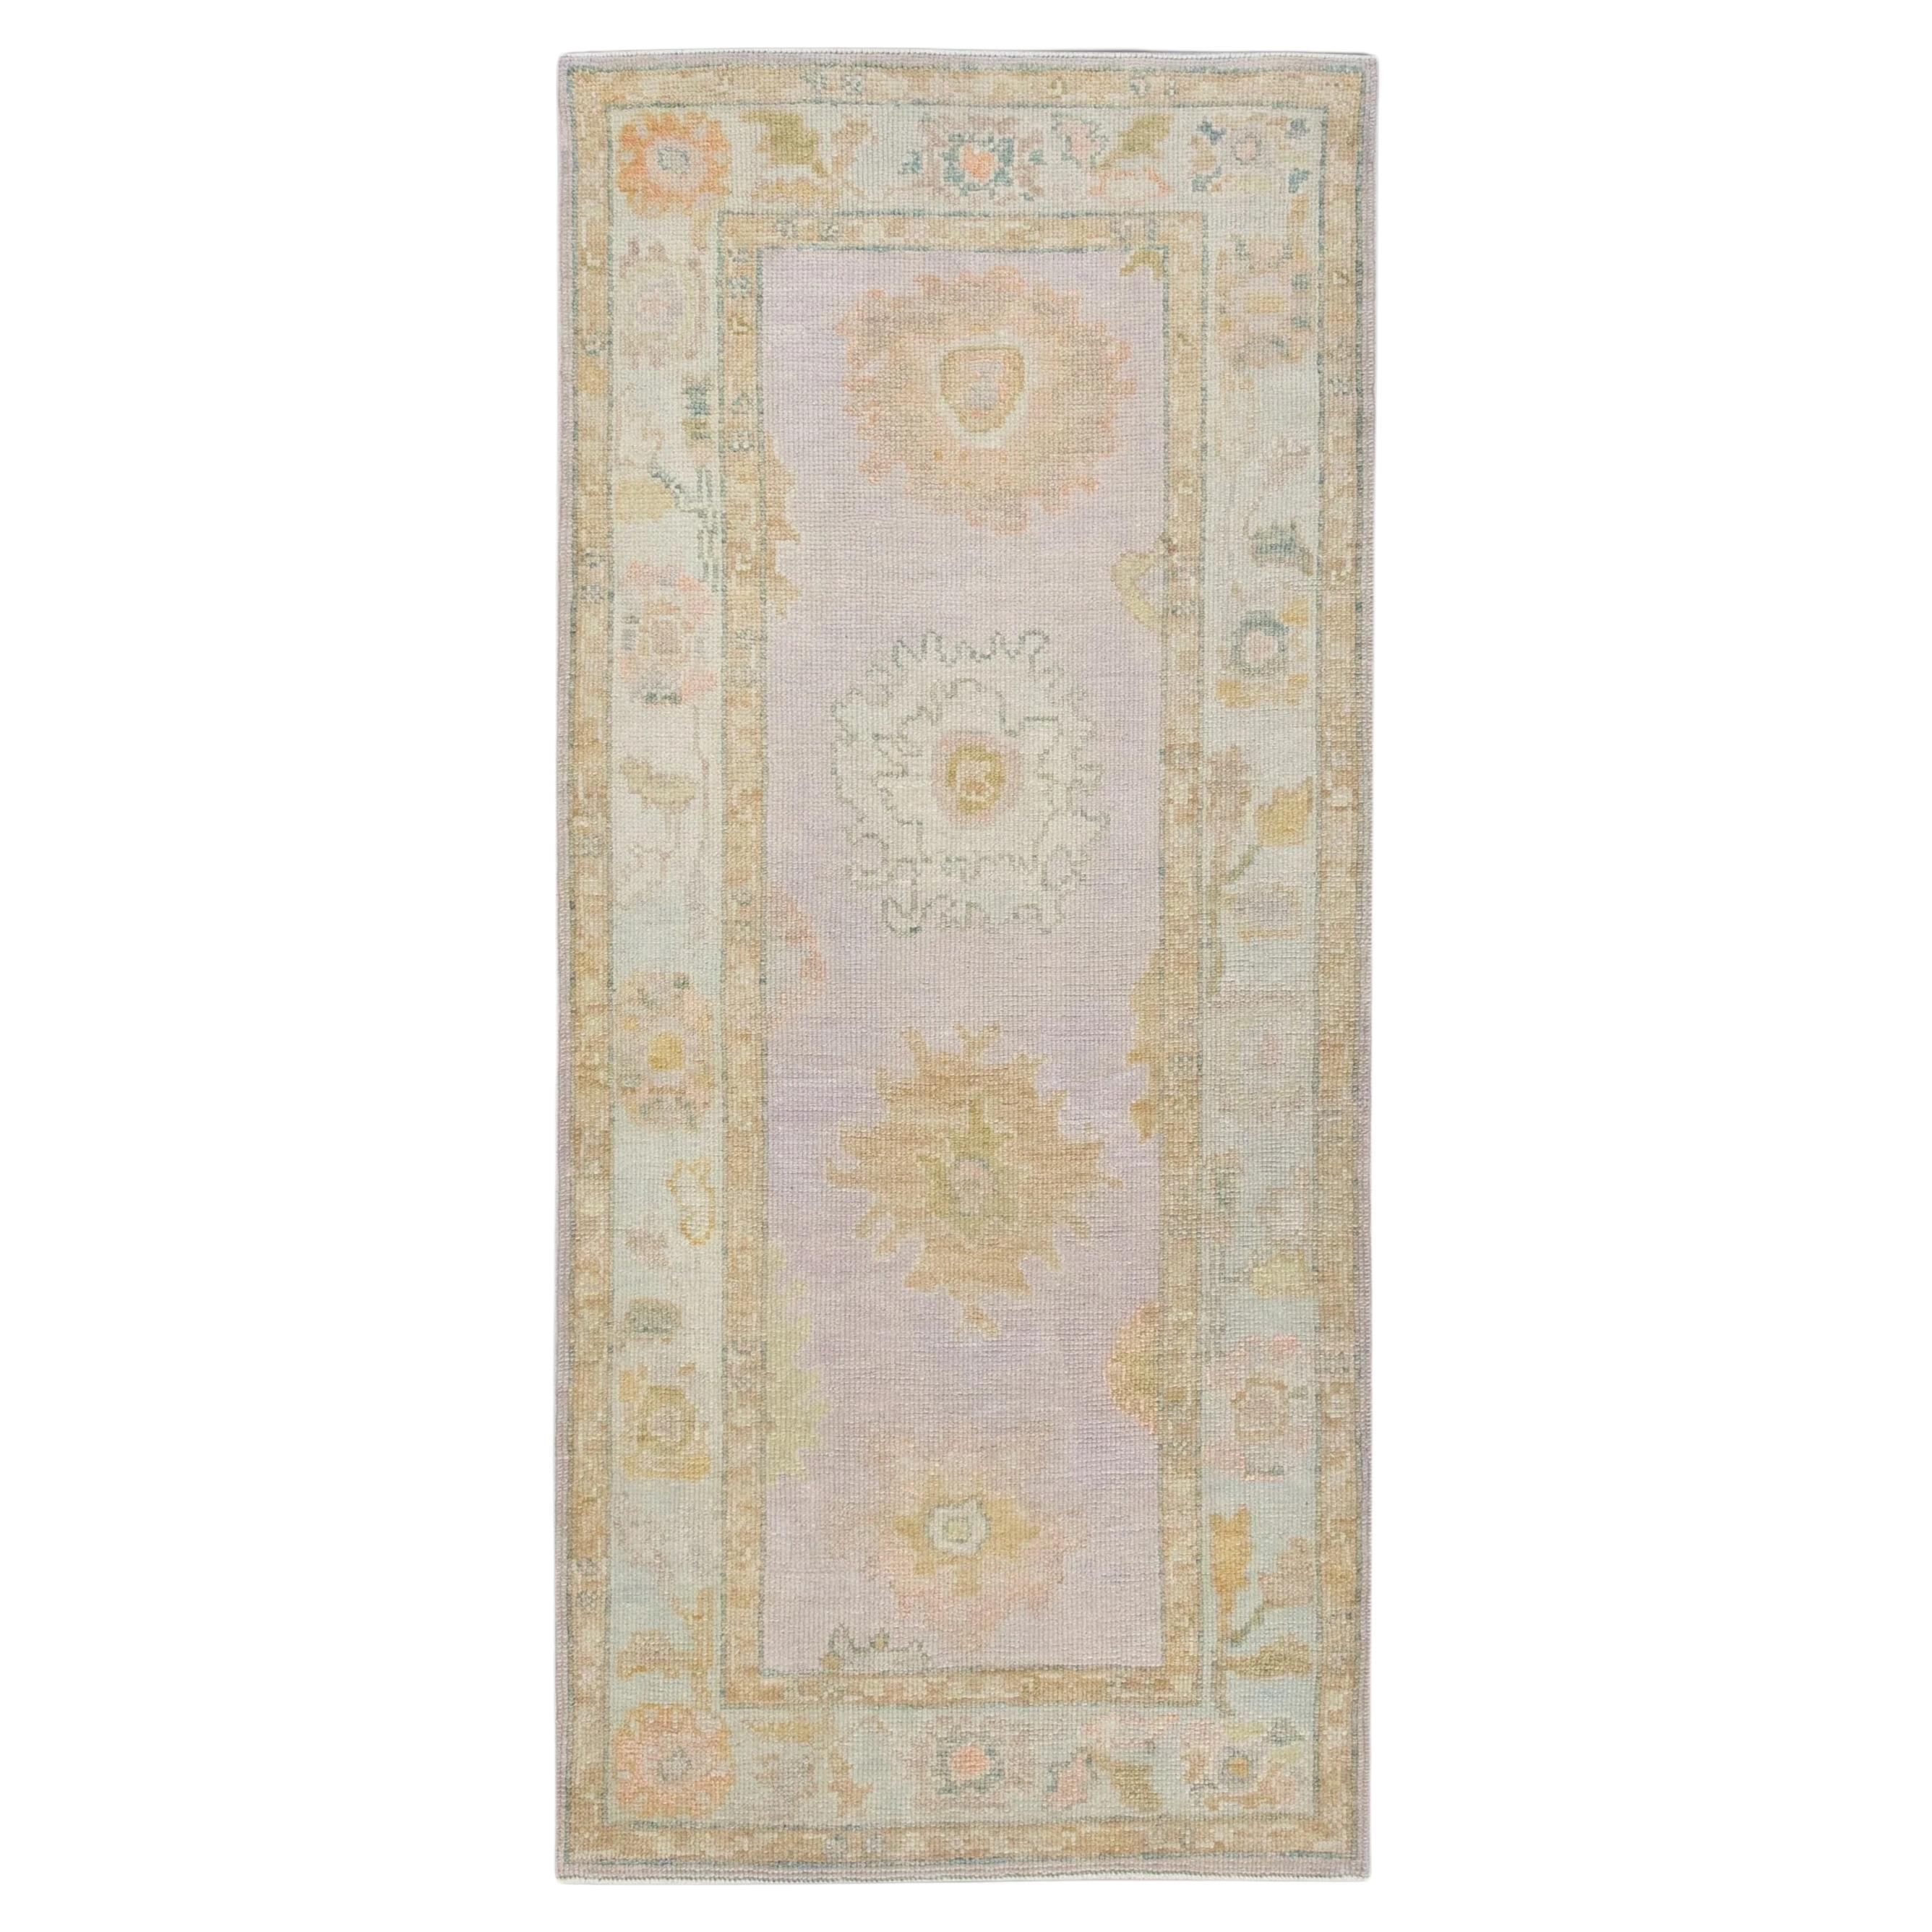 Handwoven Wool Turkish Oushak Rug with Pastel Colors and Floral Design 3' x 6'8" For Sale